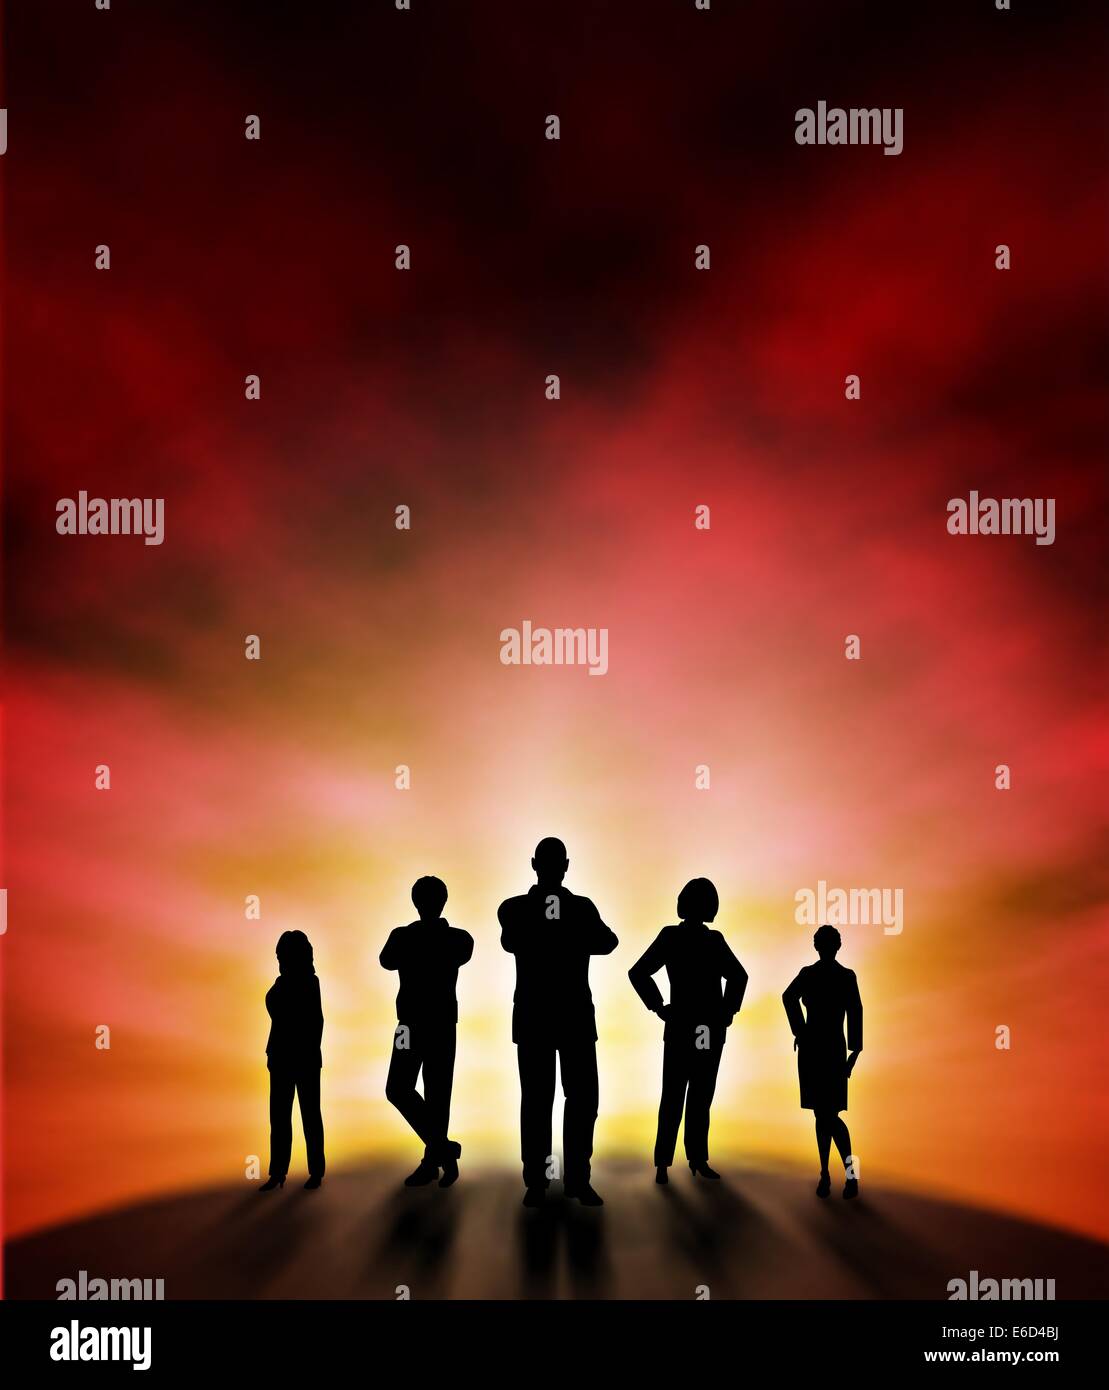 Editable vector illustration of a business team silhouette standing at a new dawn with background made using a gradient mesh Stock Vector